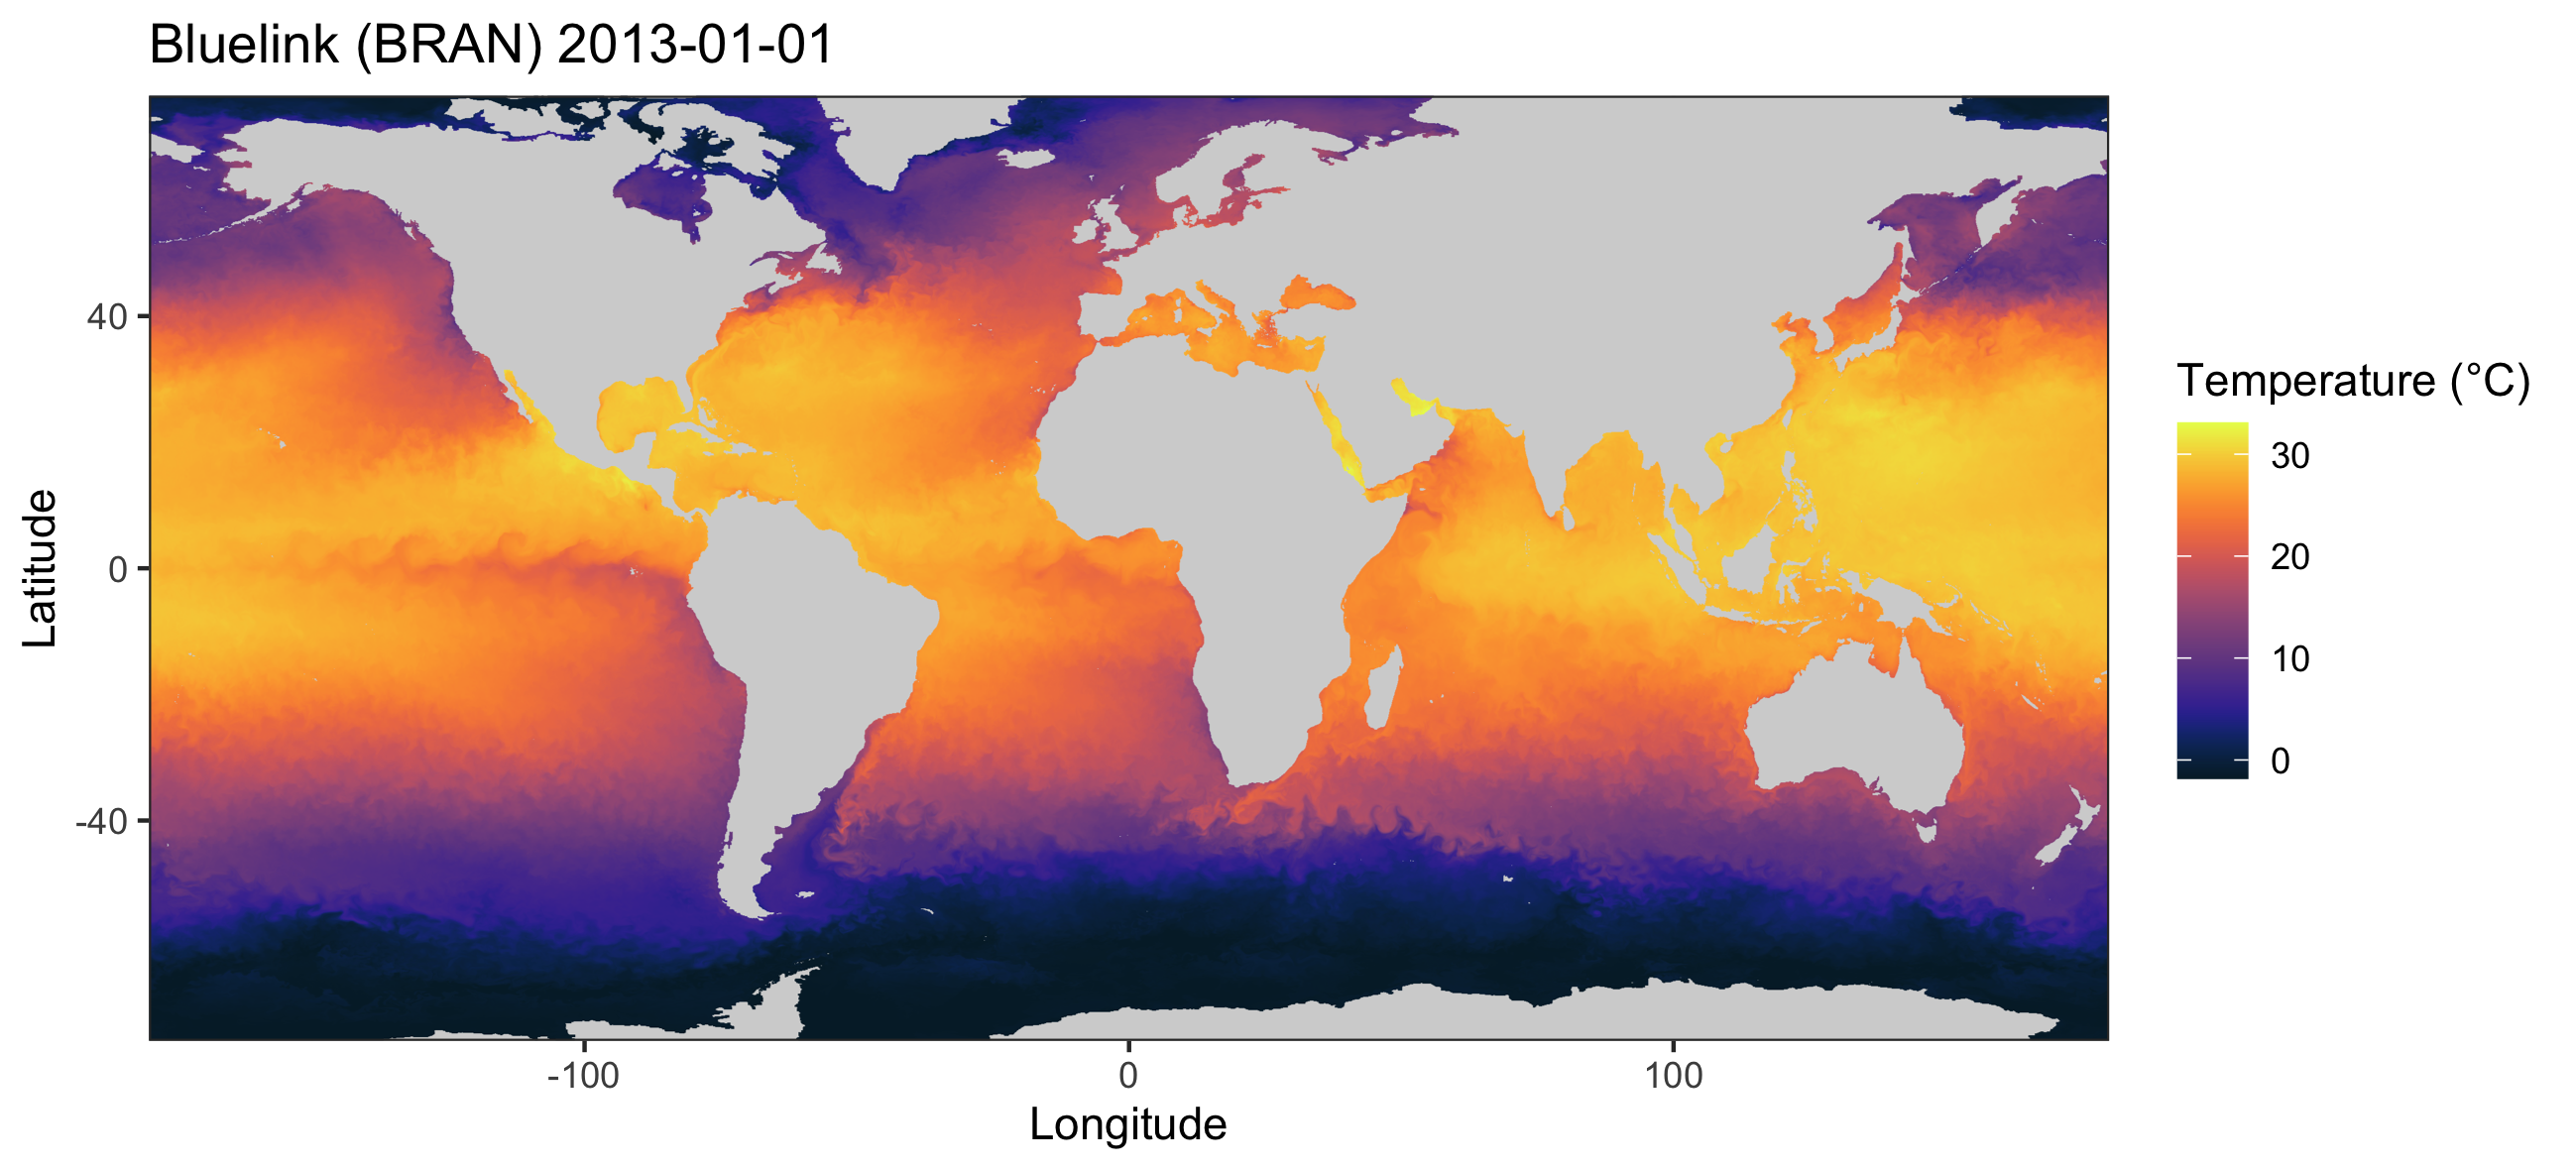 Example of Bluelink (BRAN) water temperature data at the surface on 1 January 2013 showing its global coverage